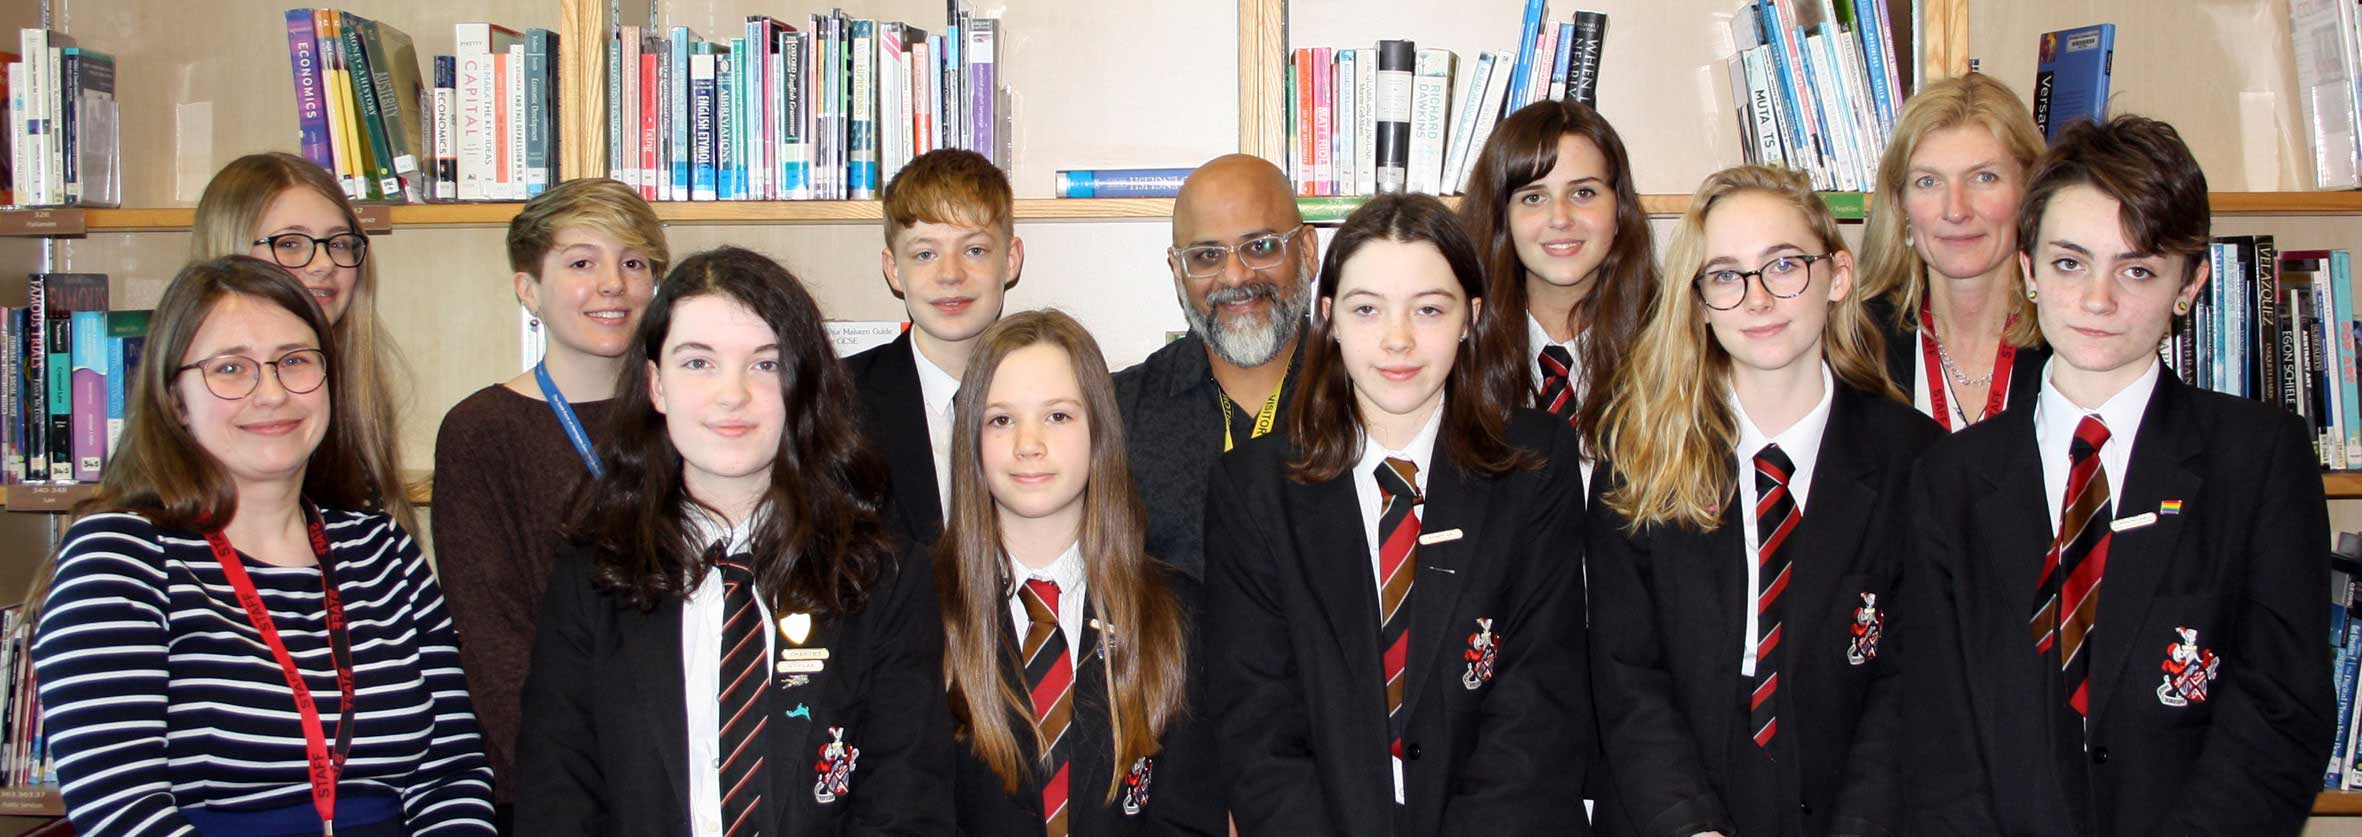 Front row, left to right: Dr Compton, Hannah Rowe, Mariella Ploix, Holly Brayshay, Lucy Kilner, Sophie WattsBack row, left to right: Amelie Davies, Caitlin Daly, Oscar Dunn, Dr Hussain, Harriet Longley, Mrs Smith